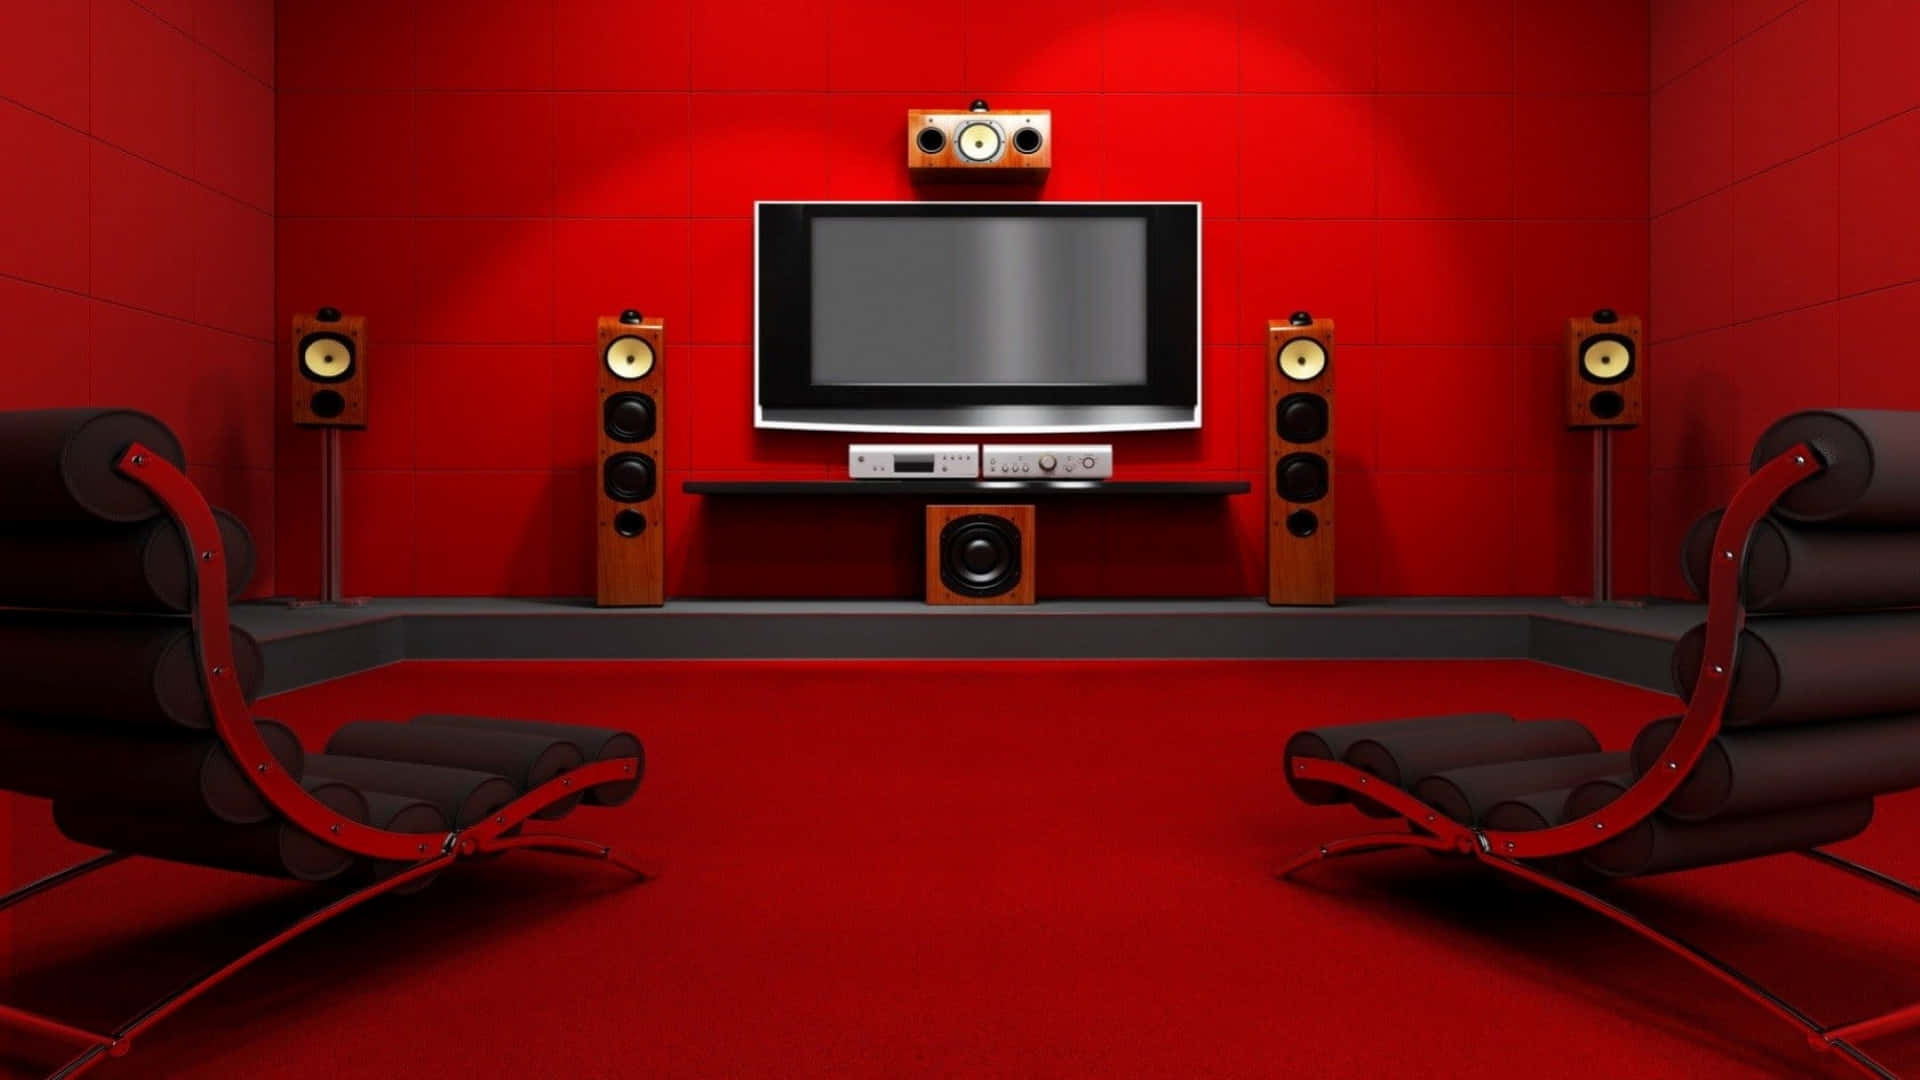 Enjoy a home theater experience with surround sound speakers Wallpaper